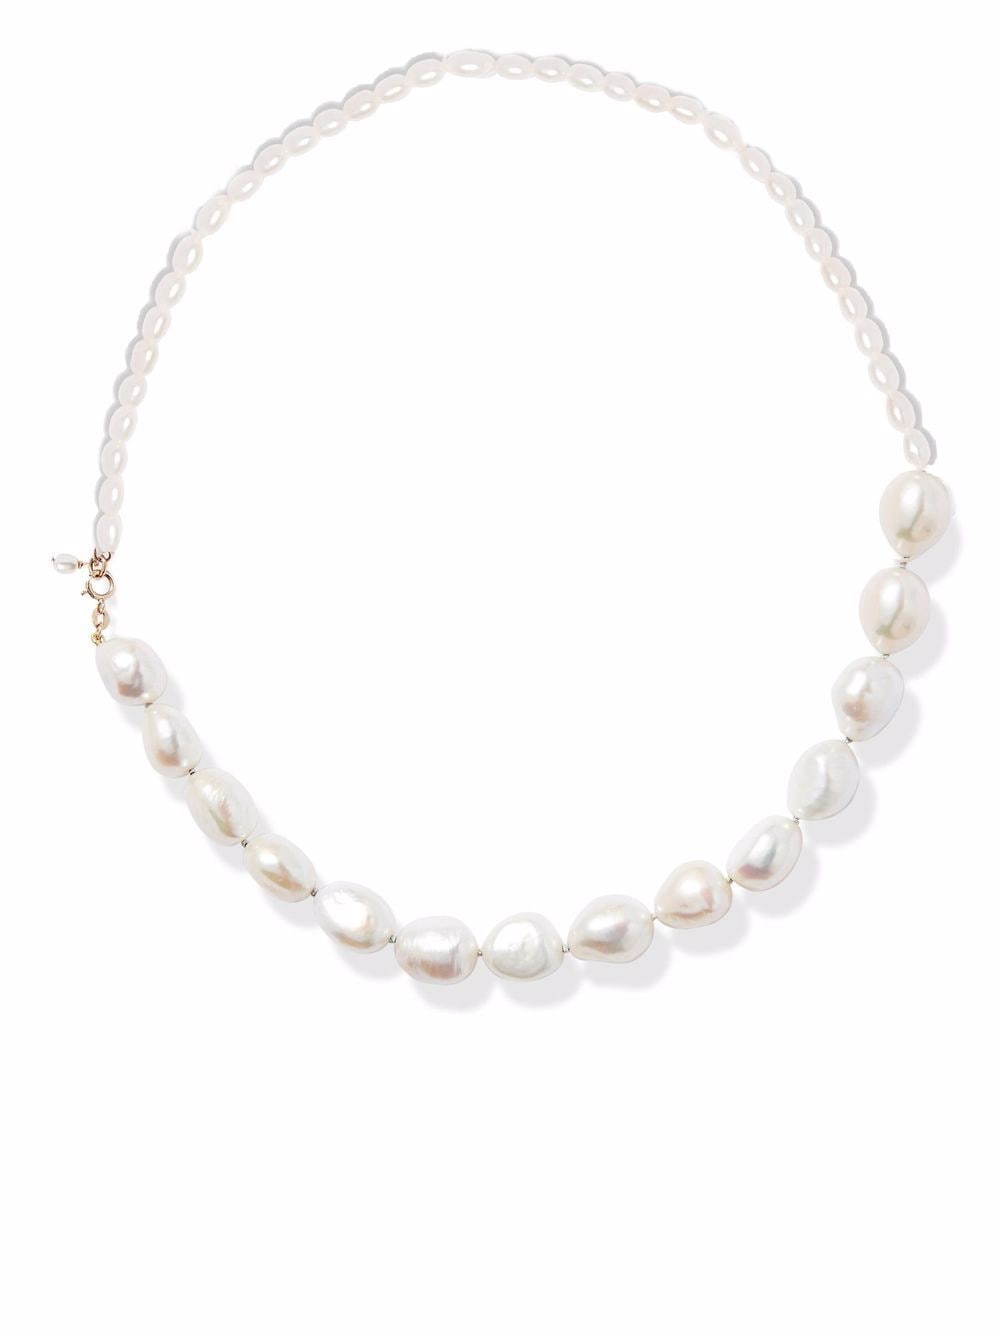 14kt yellow gold two size pearl necklace